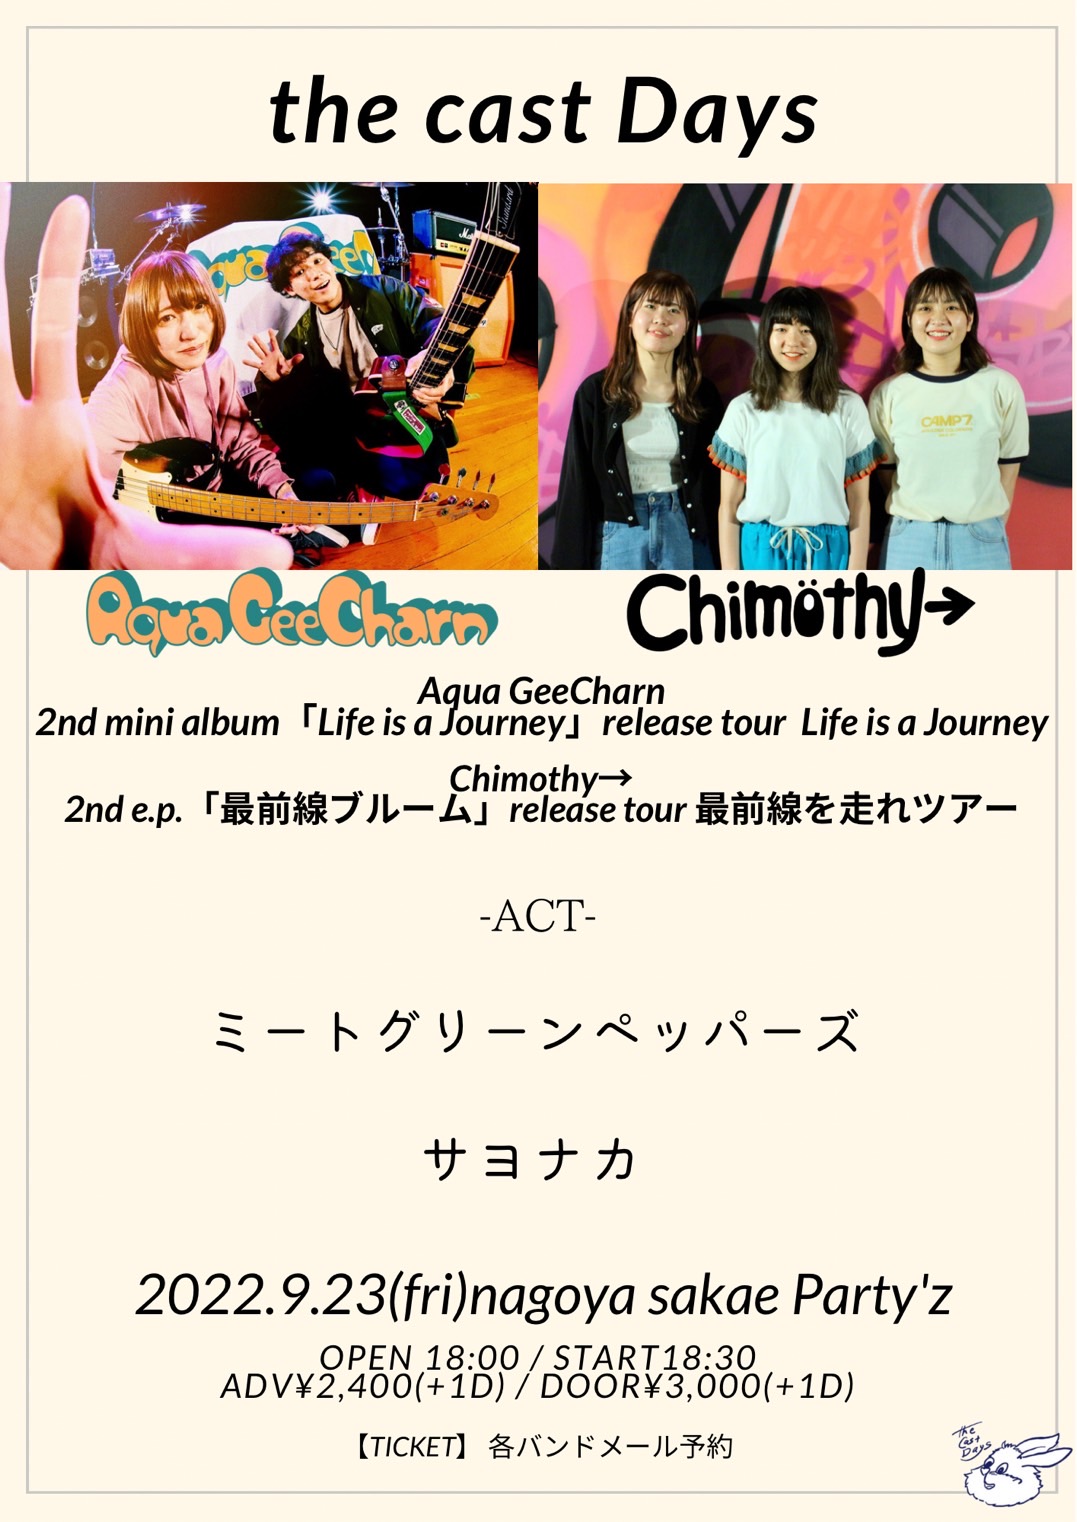 the cast Days  Aqua GeeCharn 「Life is a Journey」release tour  Chimothy→ 「最前線ブルーム」release tour